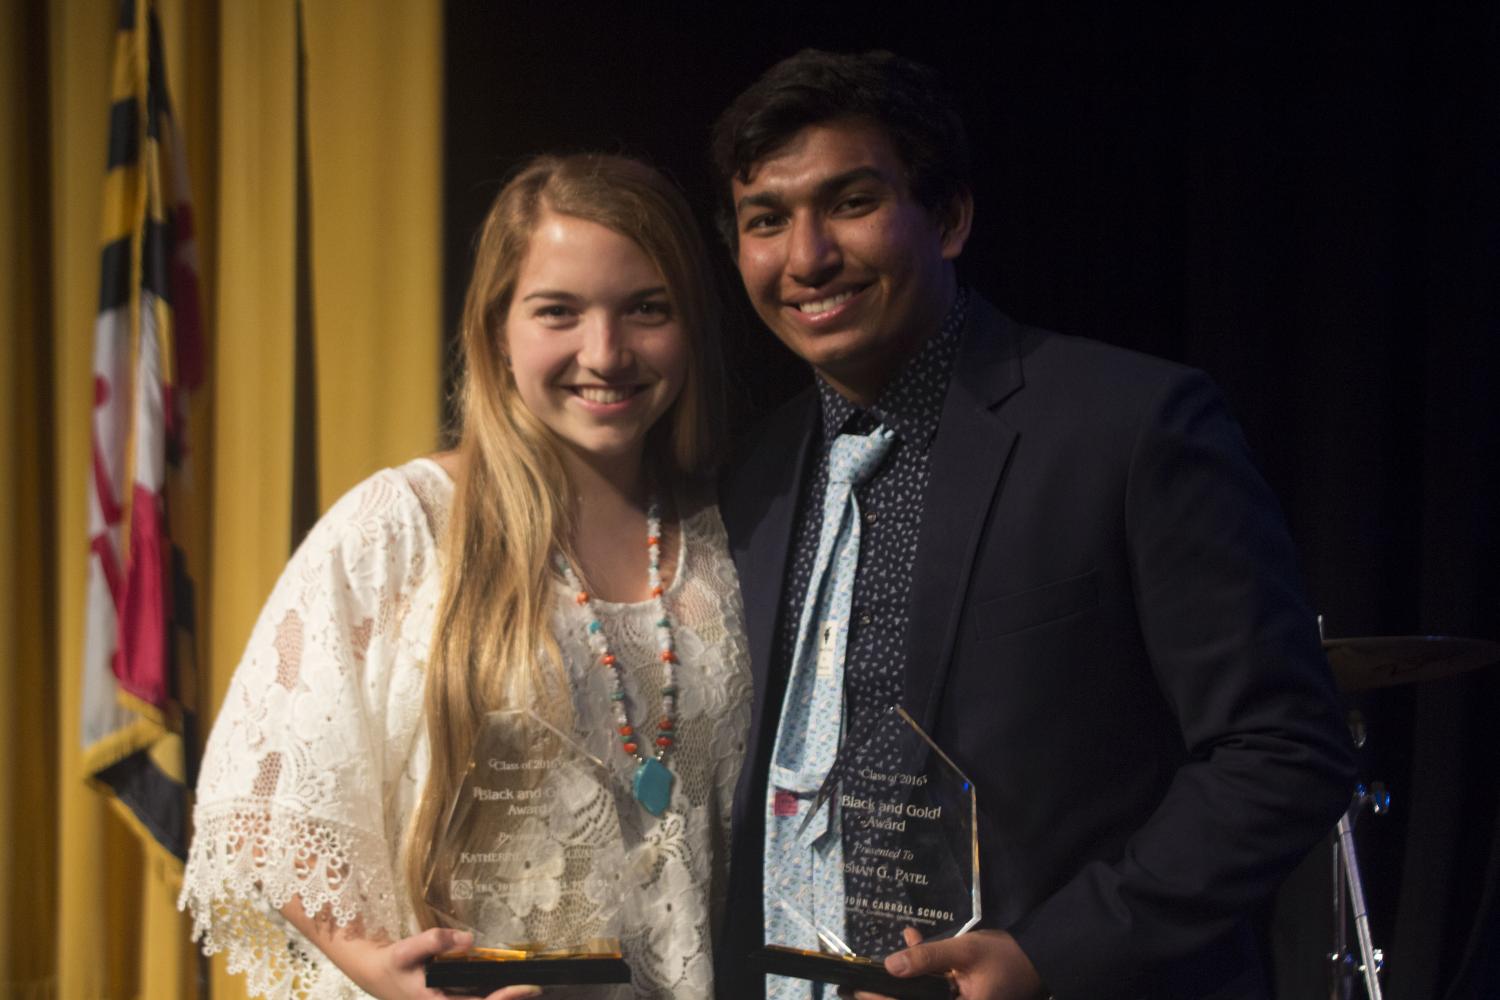 Katie Sullivan and Kishan Patel, class of 16, pose with their Black & Gold Award, which is presented to one male and one female student in the graduating senior class. This year, the nominees are seniors Caroline Cooney, Emma Gromacki, Pia Scotto, Emily Stancliff, Edward Benner, Nicholas Hinke, Caleb Olsen, and Daniel Robinson.